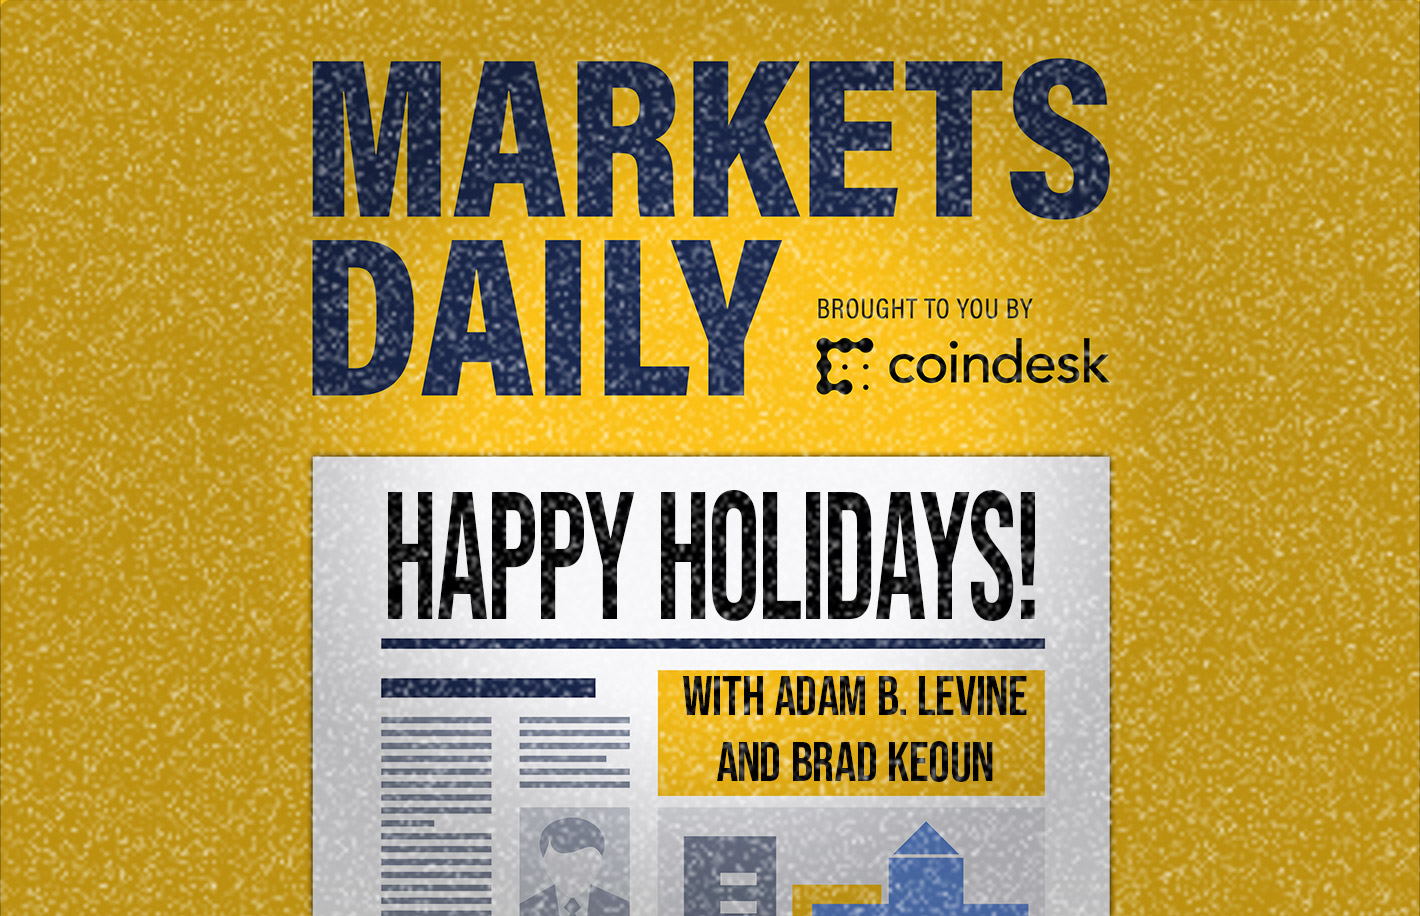 MARKETS DAILY HOLIDAYS: Smart Contracts?